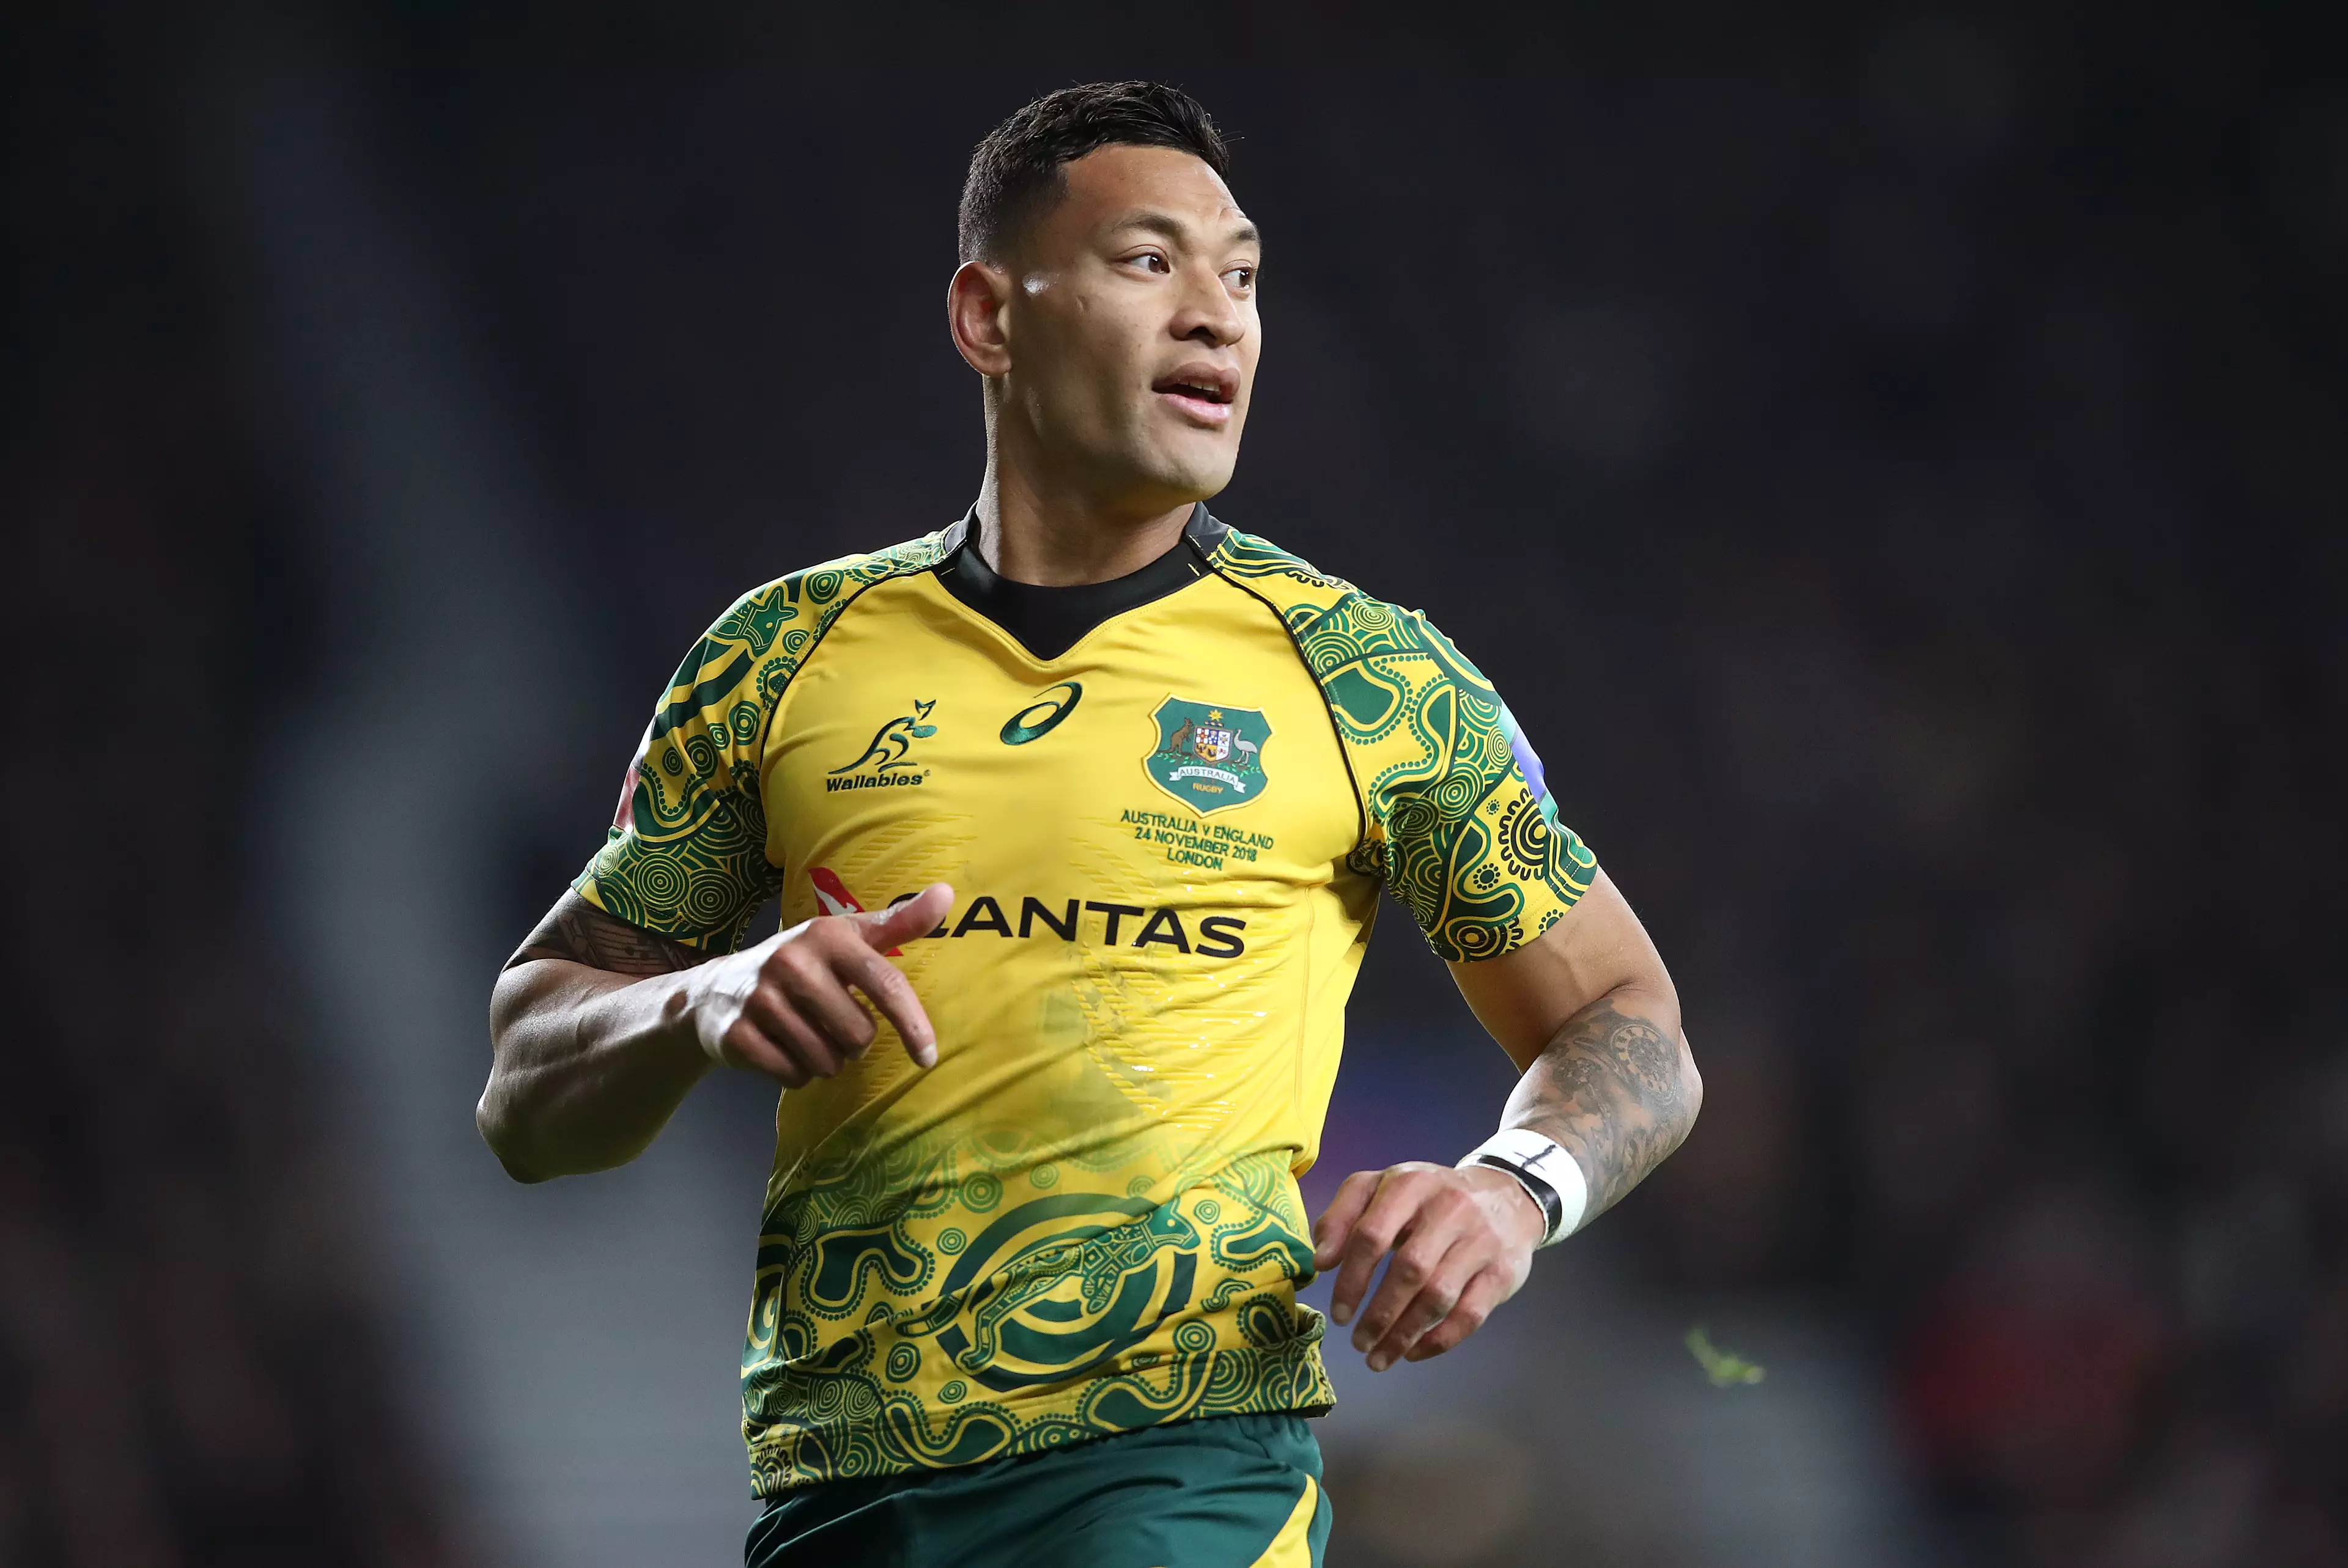 Israel Folau playing for the Wallabies.